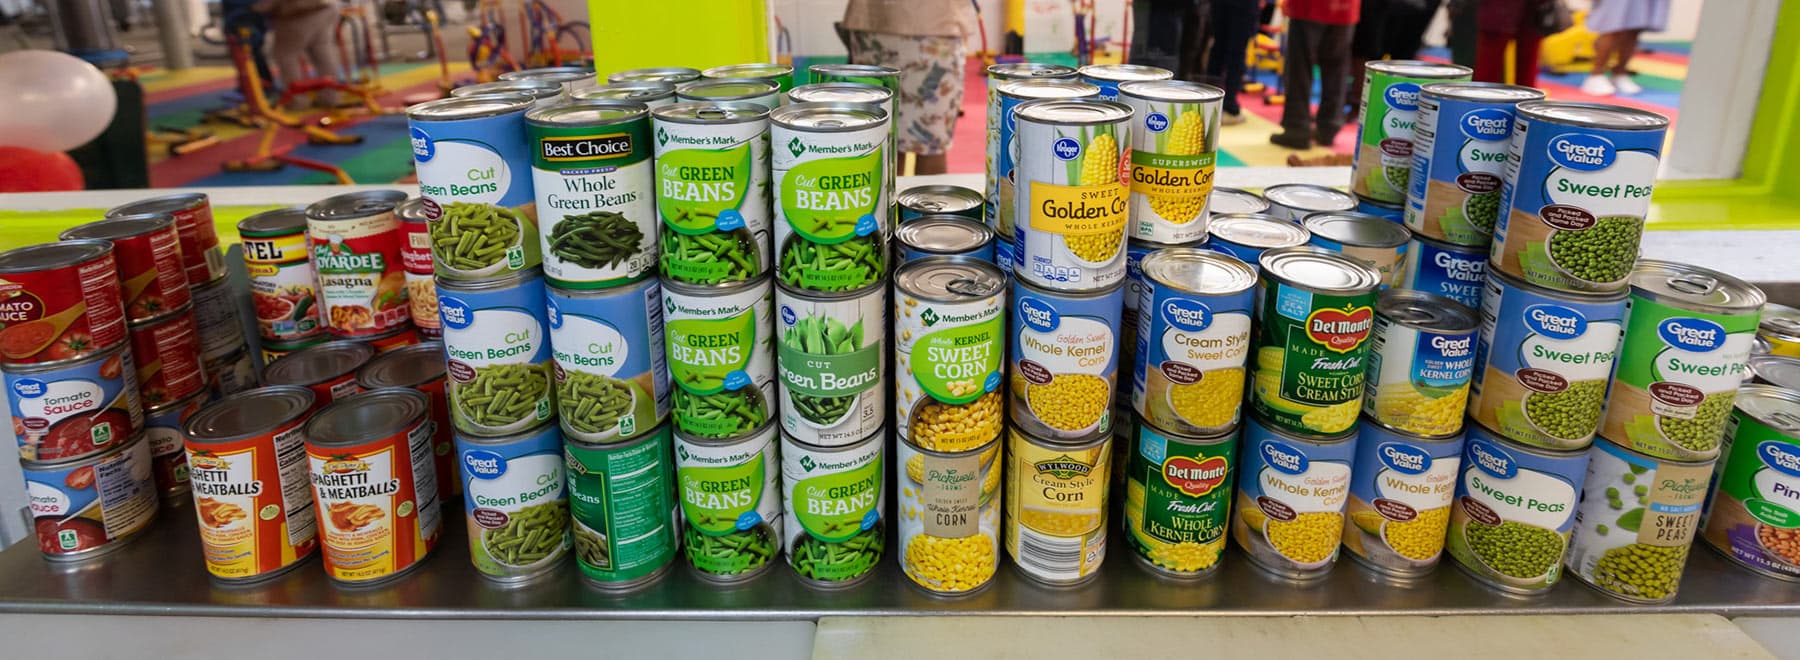 Cans of food on the shelf of the EversCare food pantry